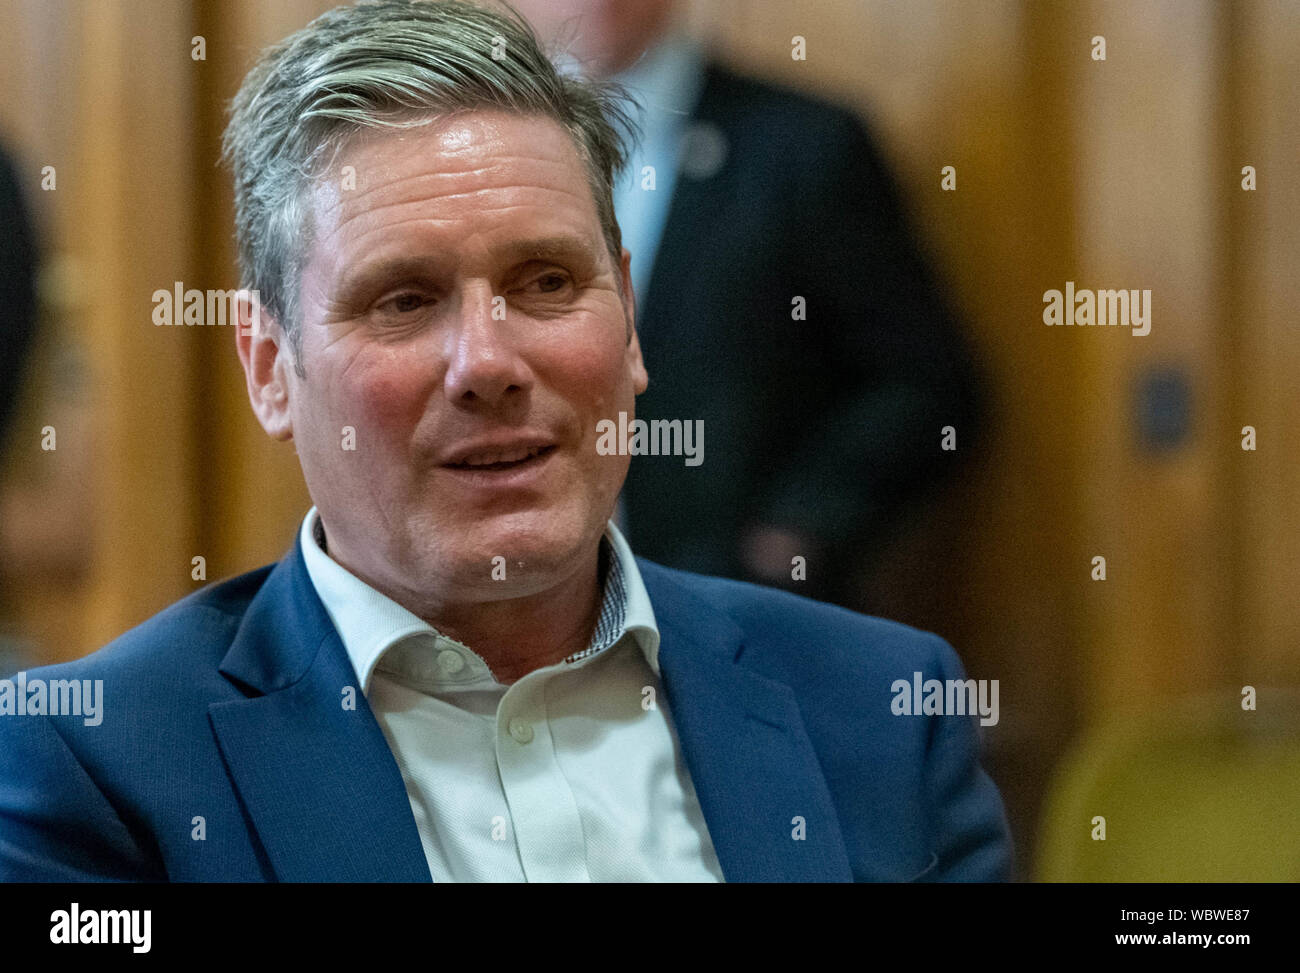 London, UK. 27 August 2019.  Church House declaration meeting of UK opposition leaders and MP's signing a declaration against the shutting down of parliament by Boris Johnson MP PC Prime Minister.  Kier Starmer, Shadow Brexit Secretary, Credit Ian DavidsonAlamy Live News Stock Photo